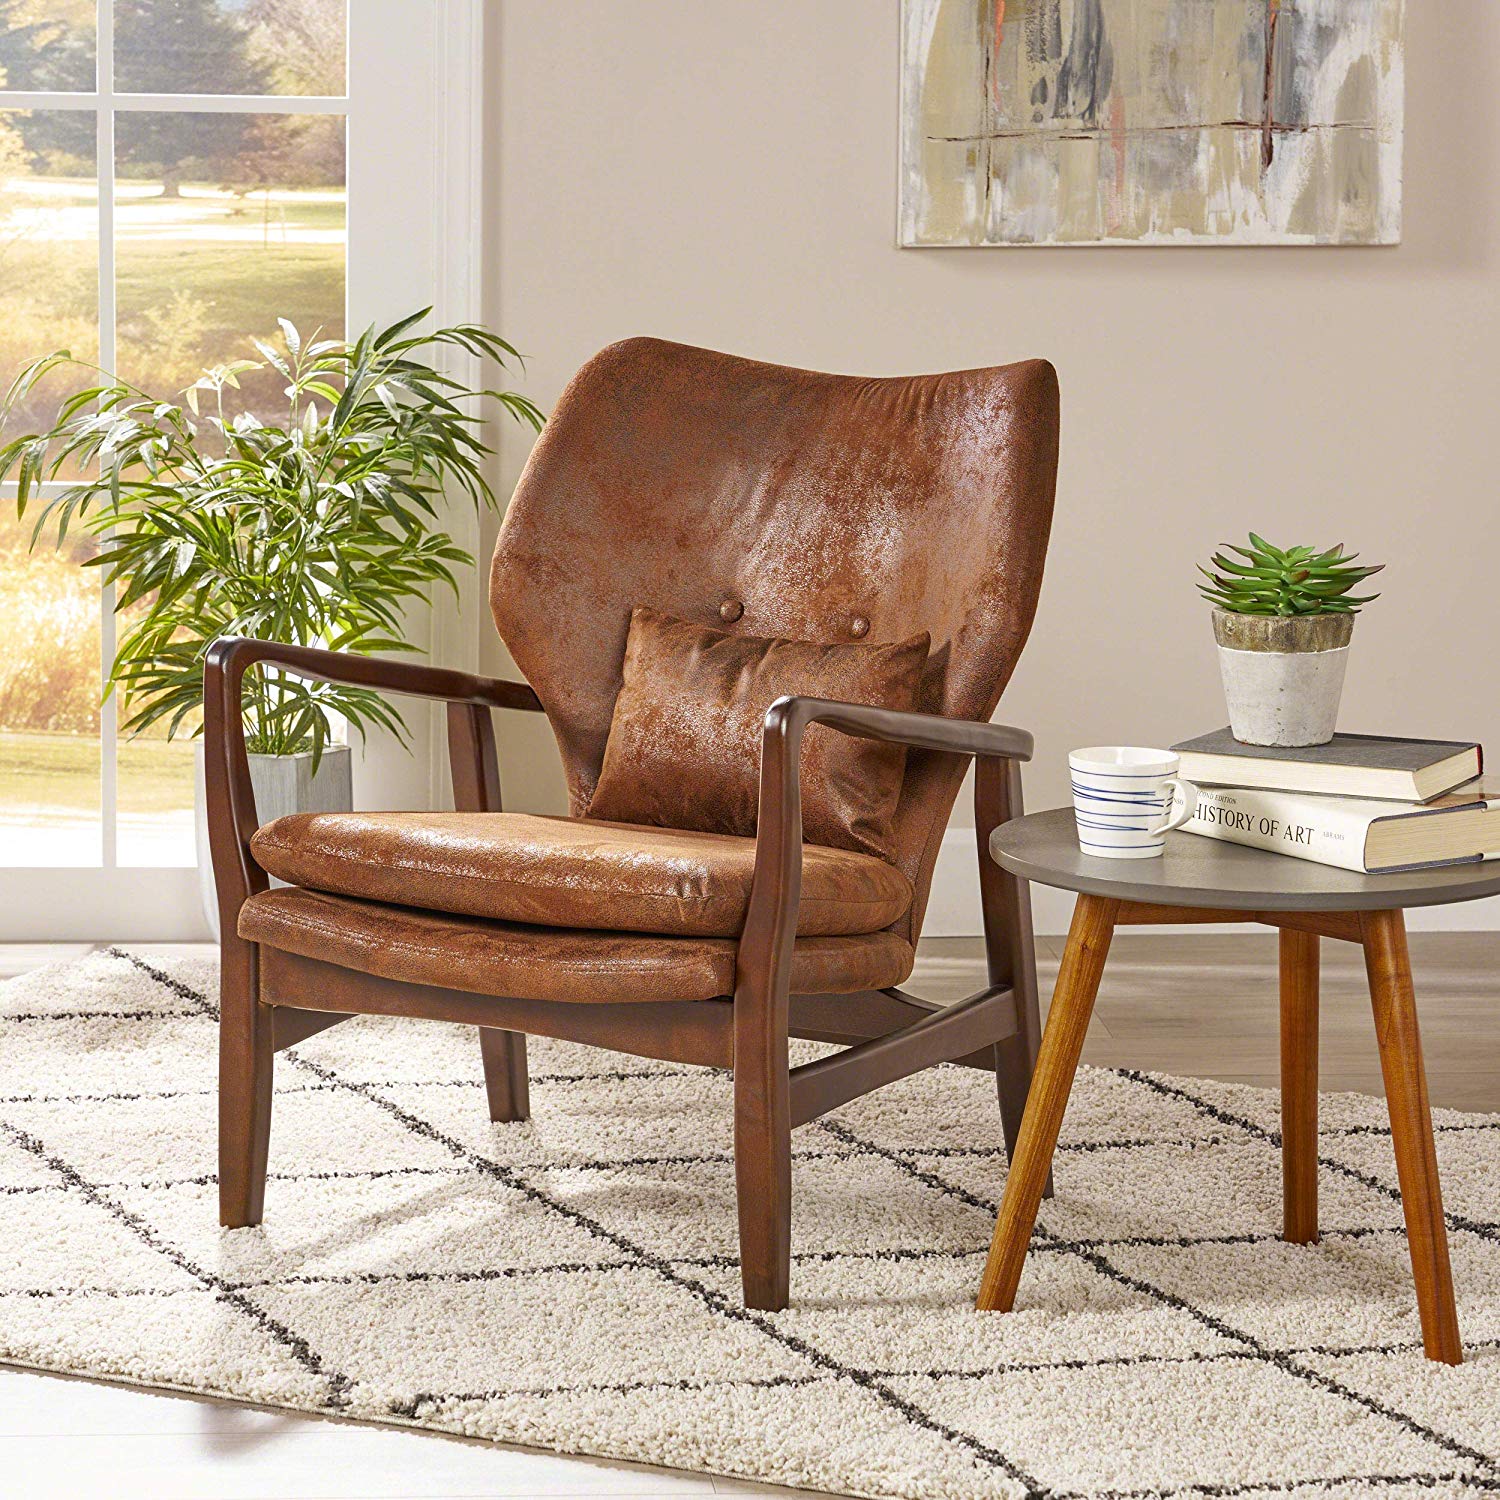 Rustic Armchair With Distressed Leather, Rustic Leather Armchair